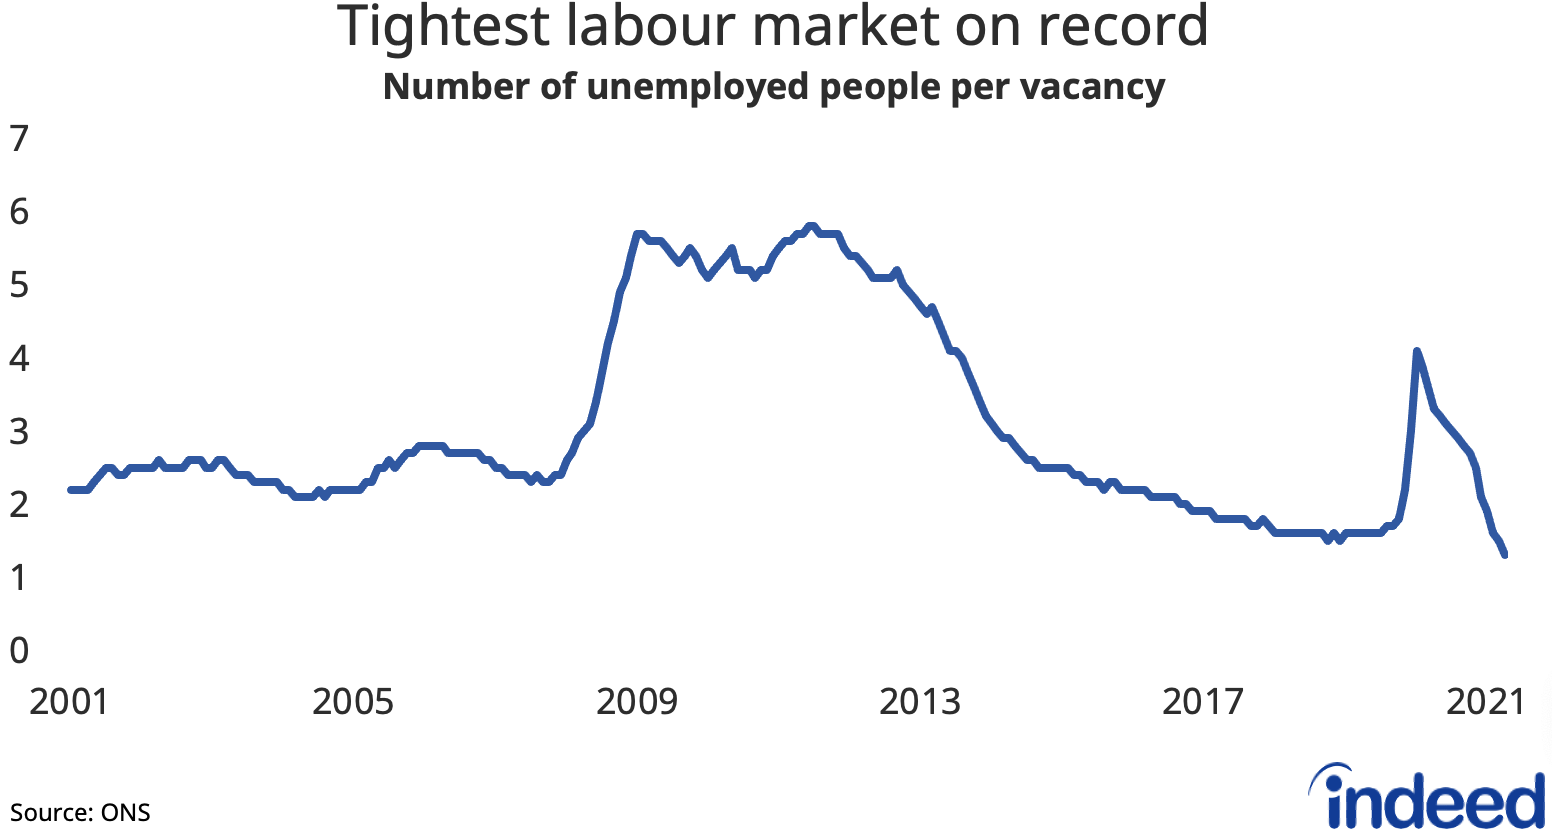 A line graph titled “Tightest labour market on record” showing the decline in the number of unemployed people per vacancy.